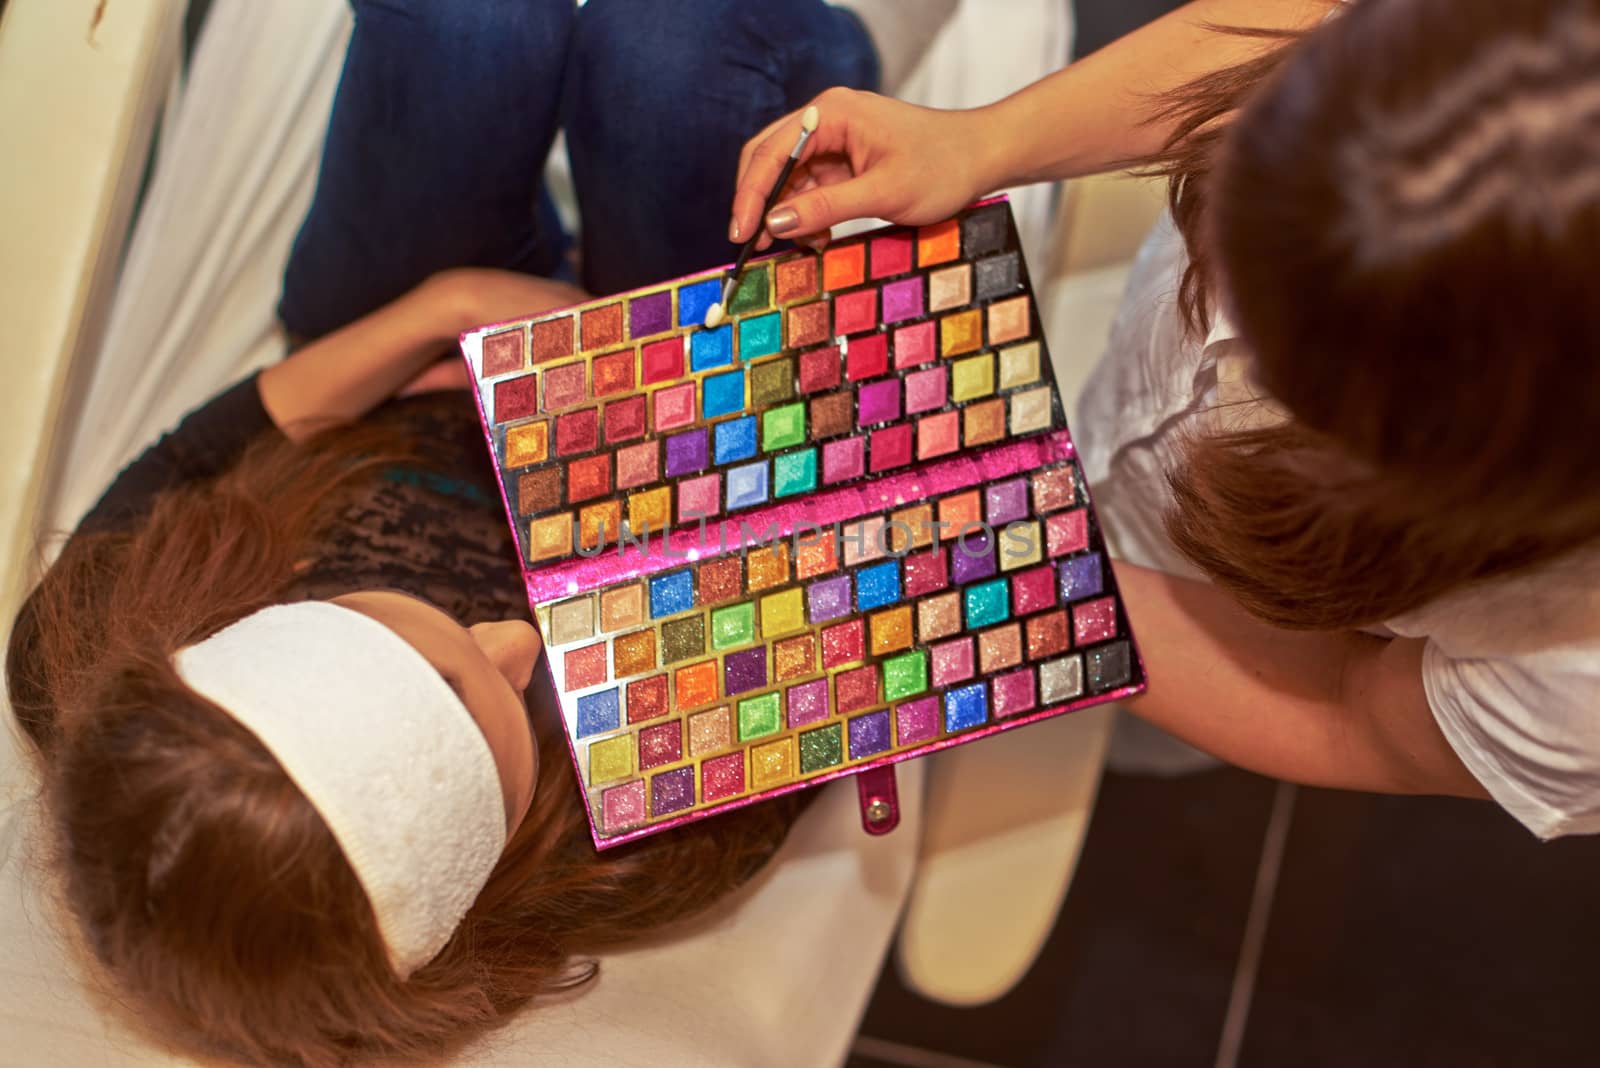 Large makeup palette used by an makeup artist by svedoliver